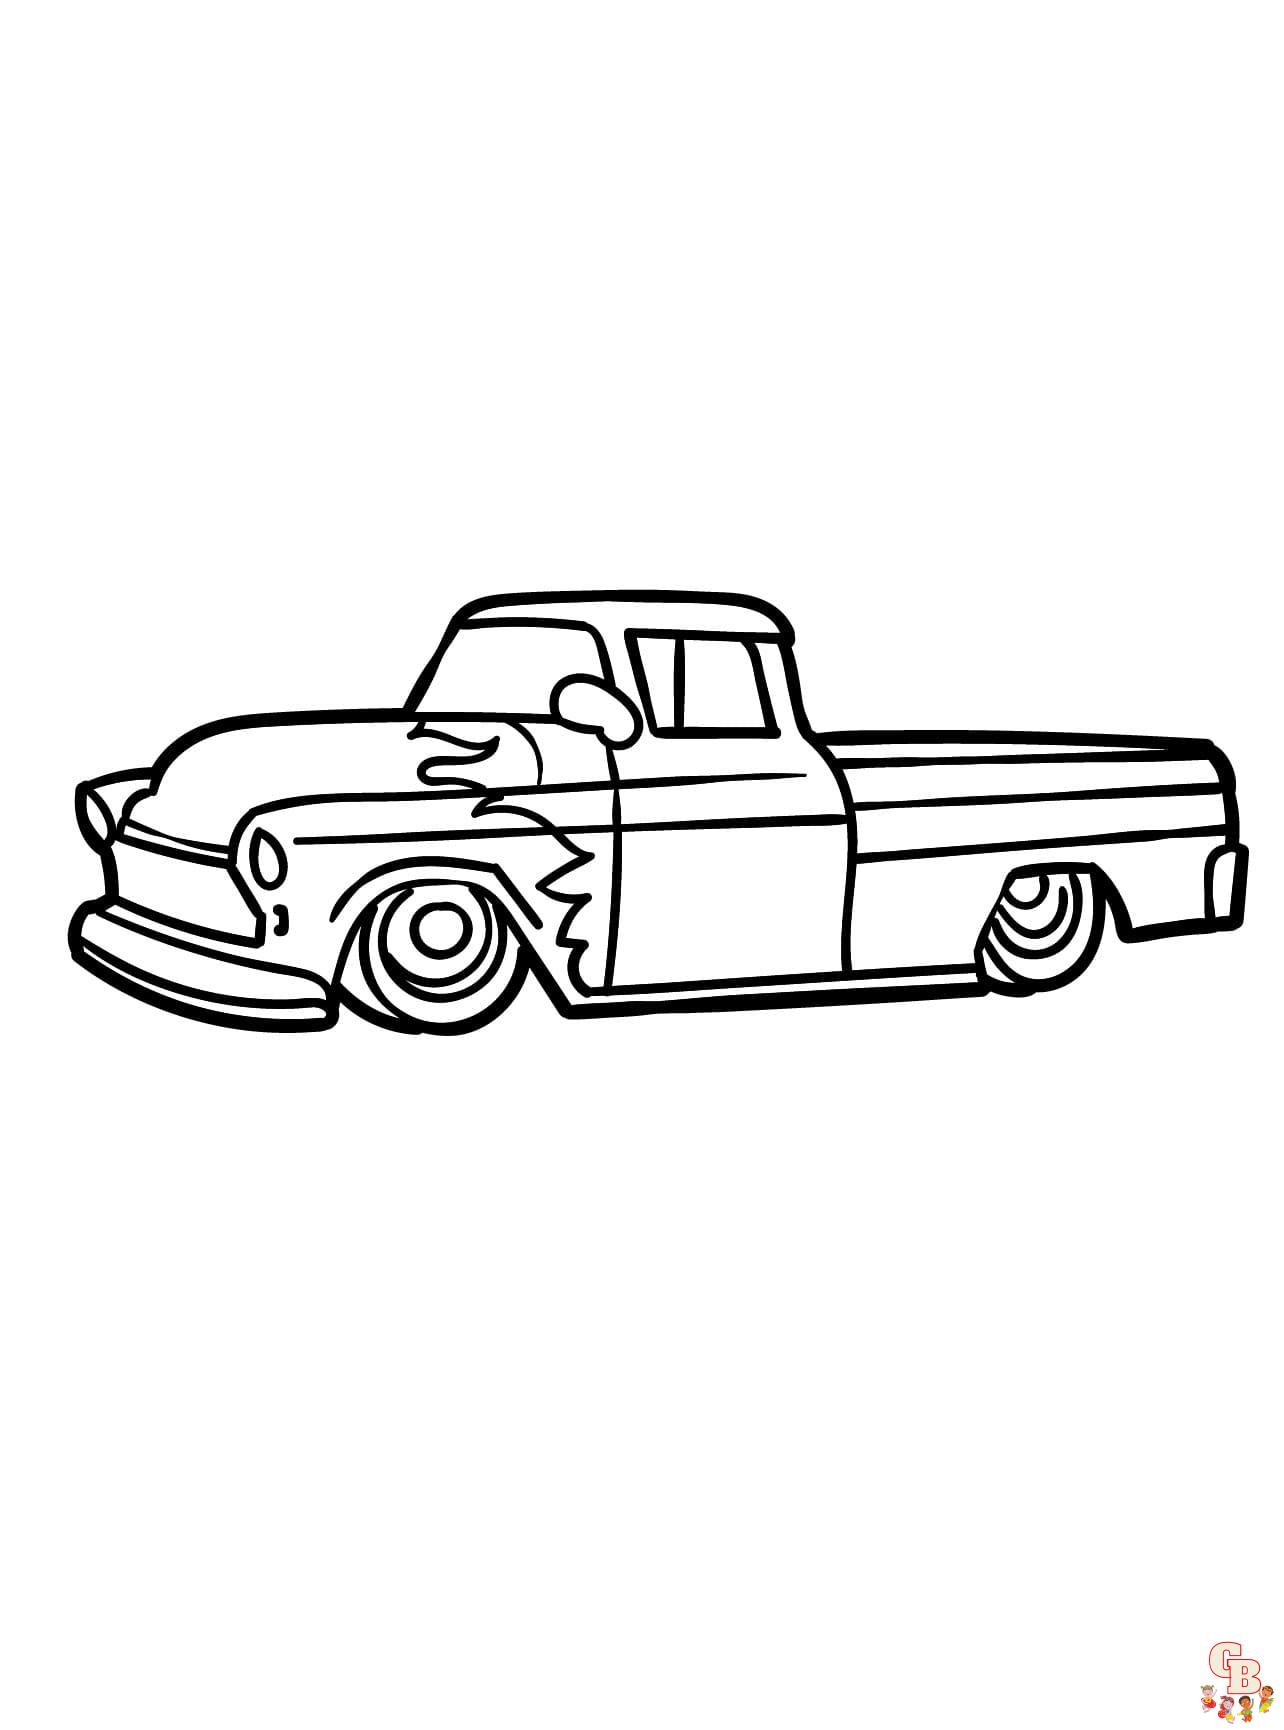 Hot Rods Coloring Pages